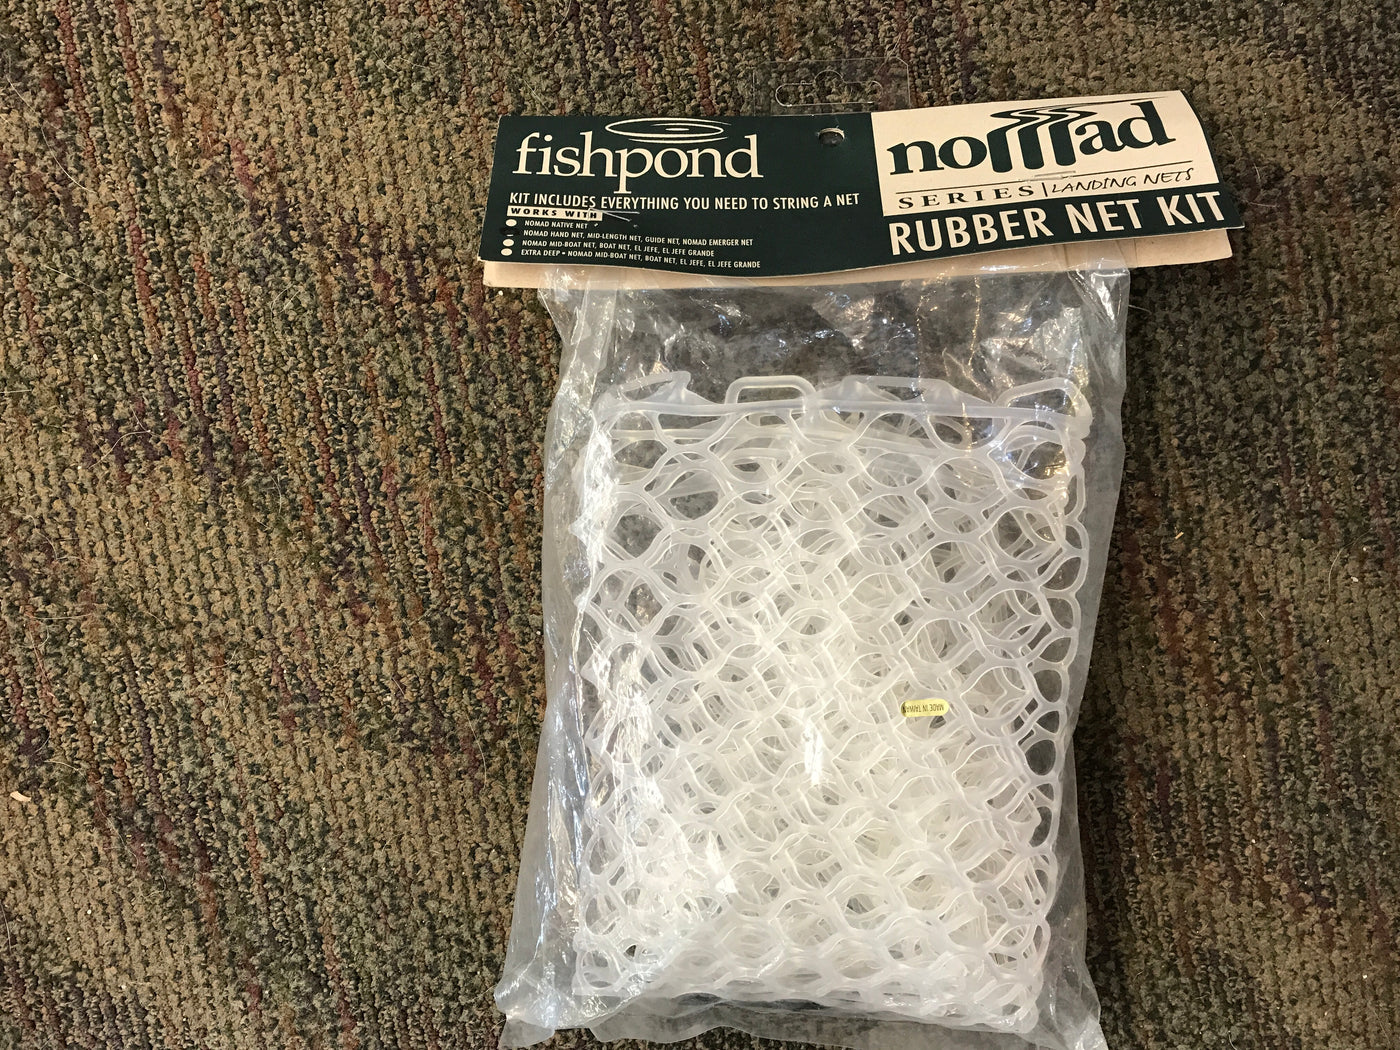  Fishpond Nomad Replacement Rubber Net, 12.5 Clear